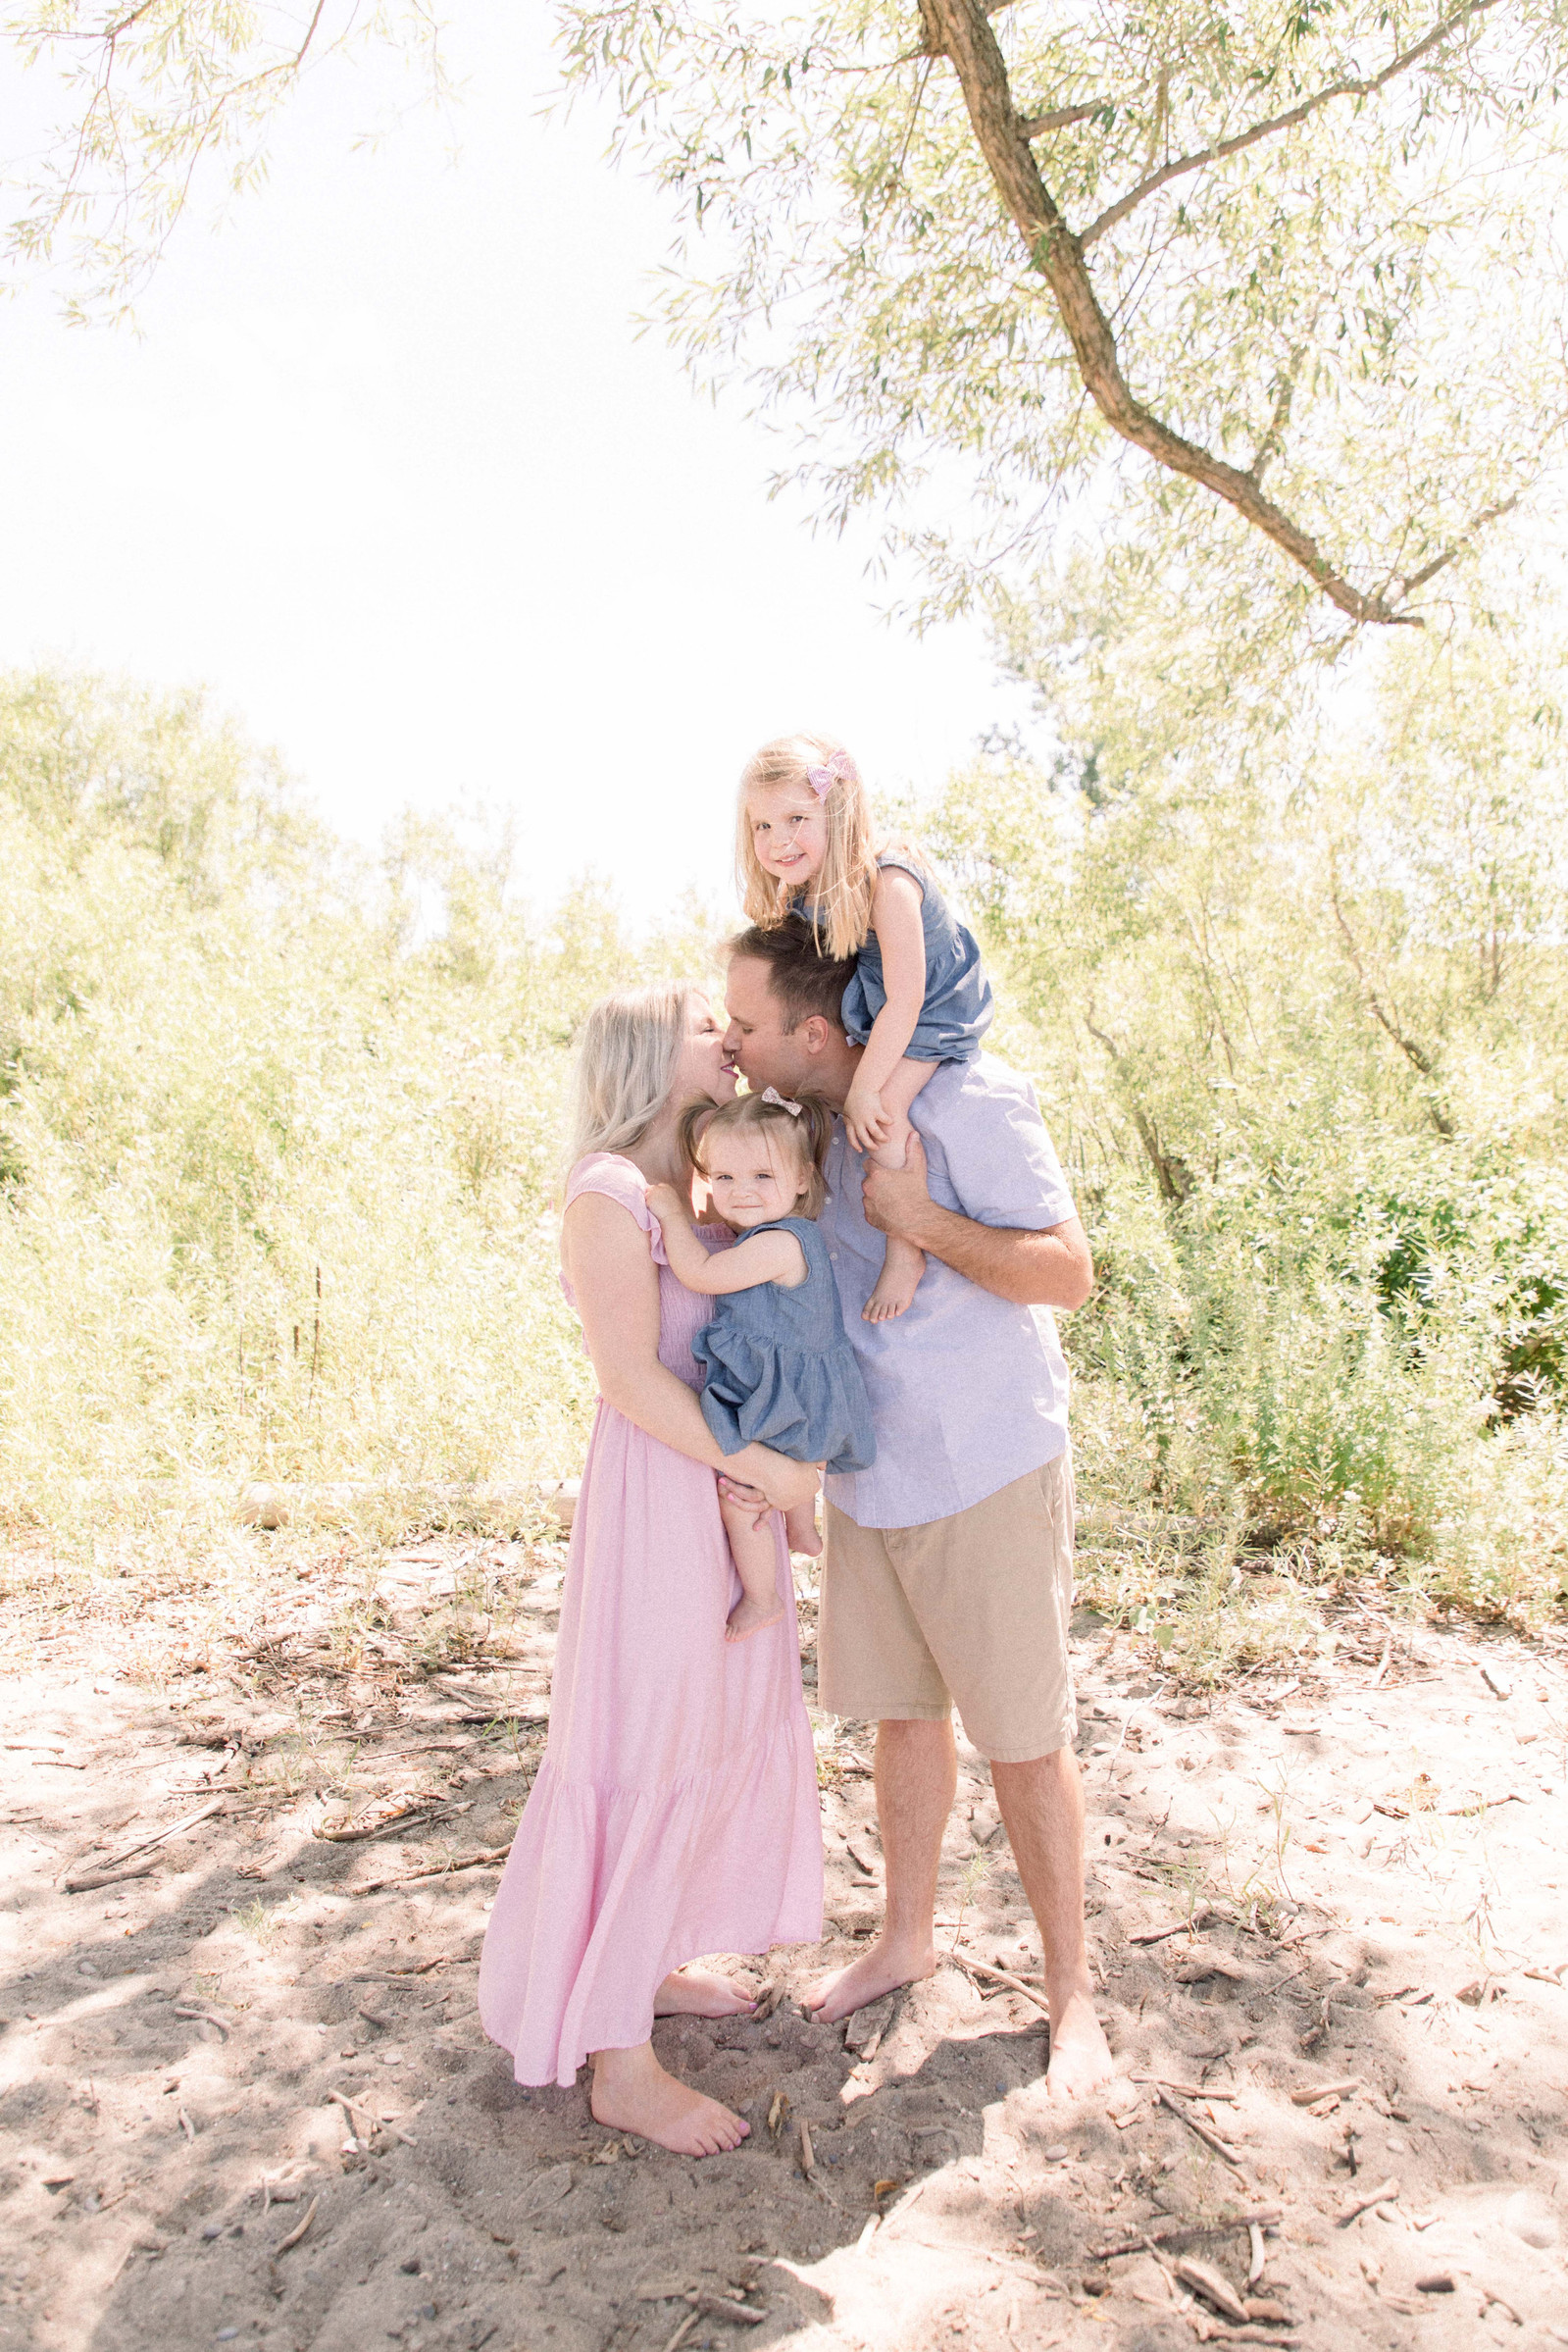 Portrait of family hugging each other on the beach. Niagara family photographer, Niagara portrait photographer, Niagara motherhood photographer, candid photography, light & airy photography, Emily VanderBeek Photography.